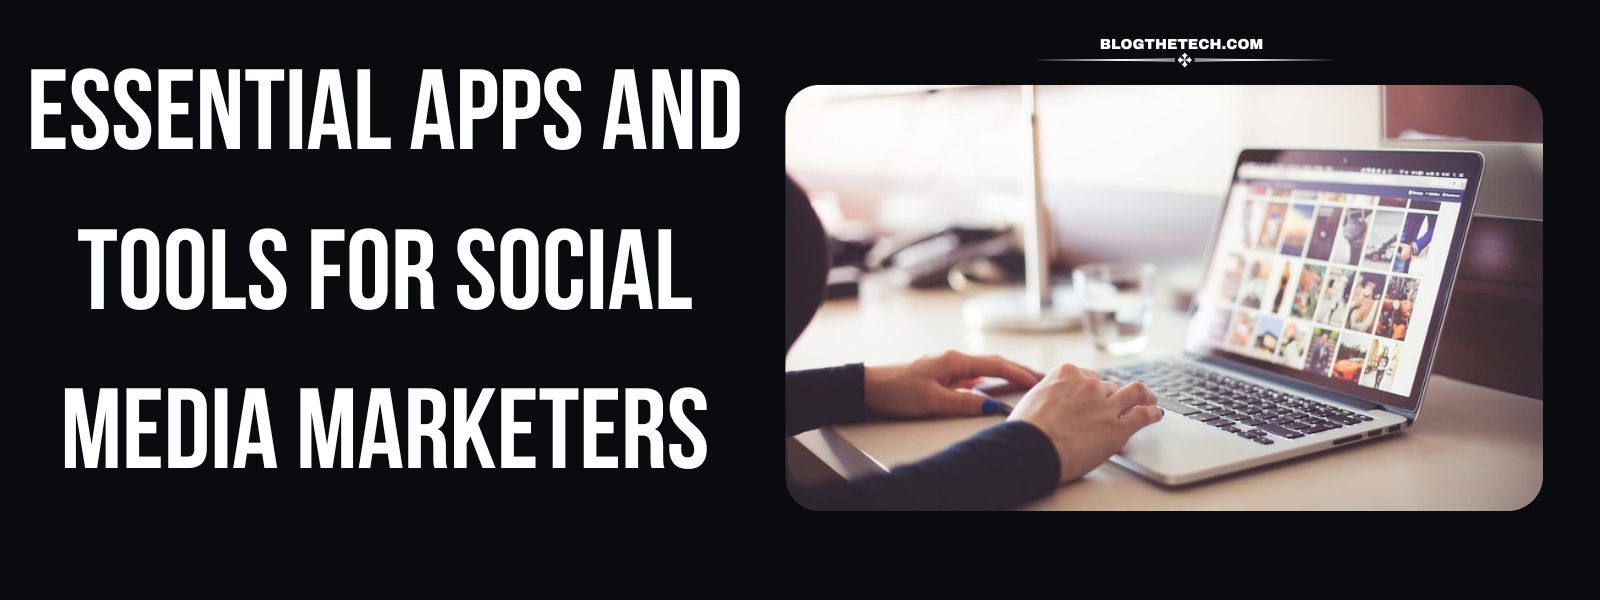 Apps And Tools For Social Media Marketers